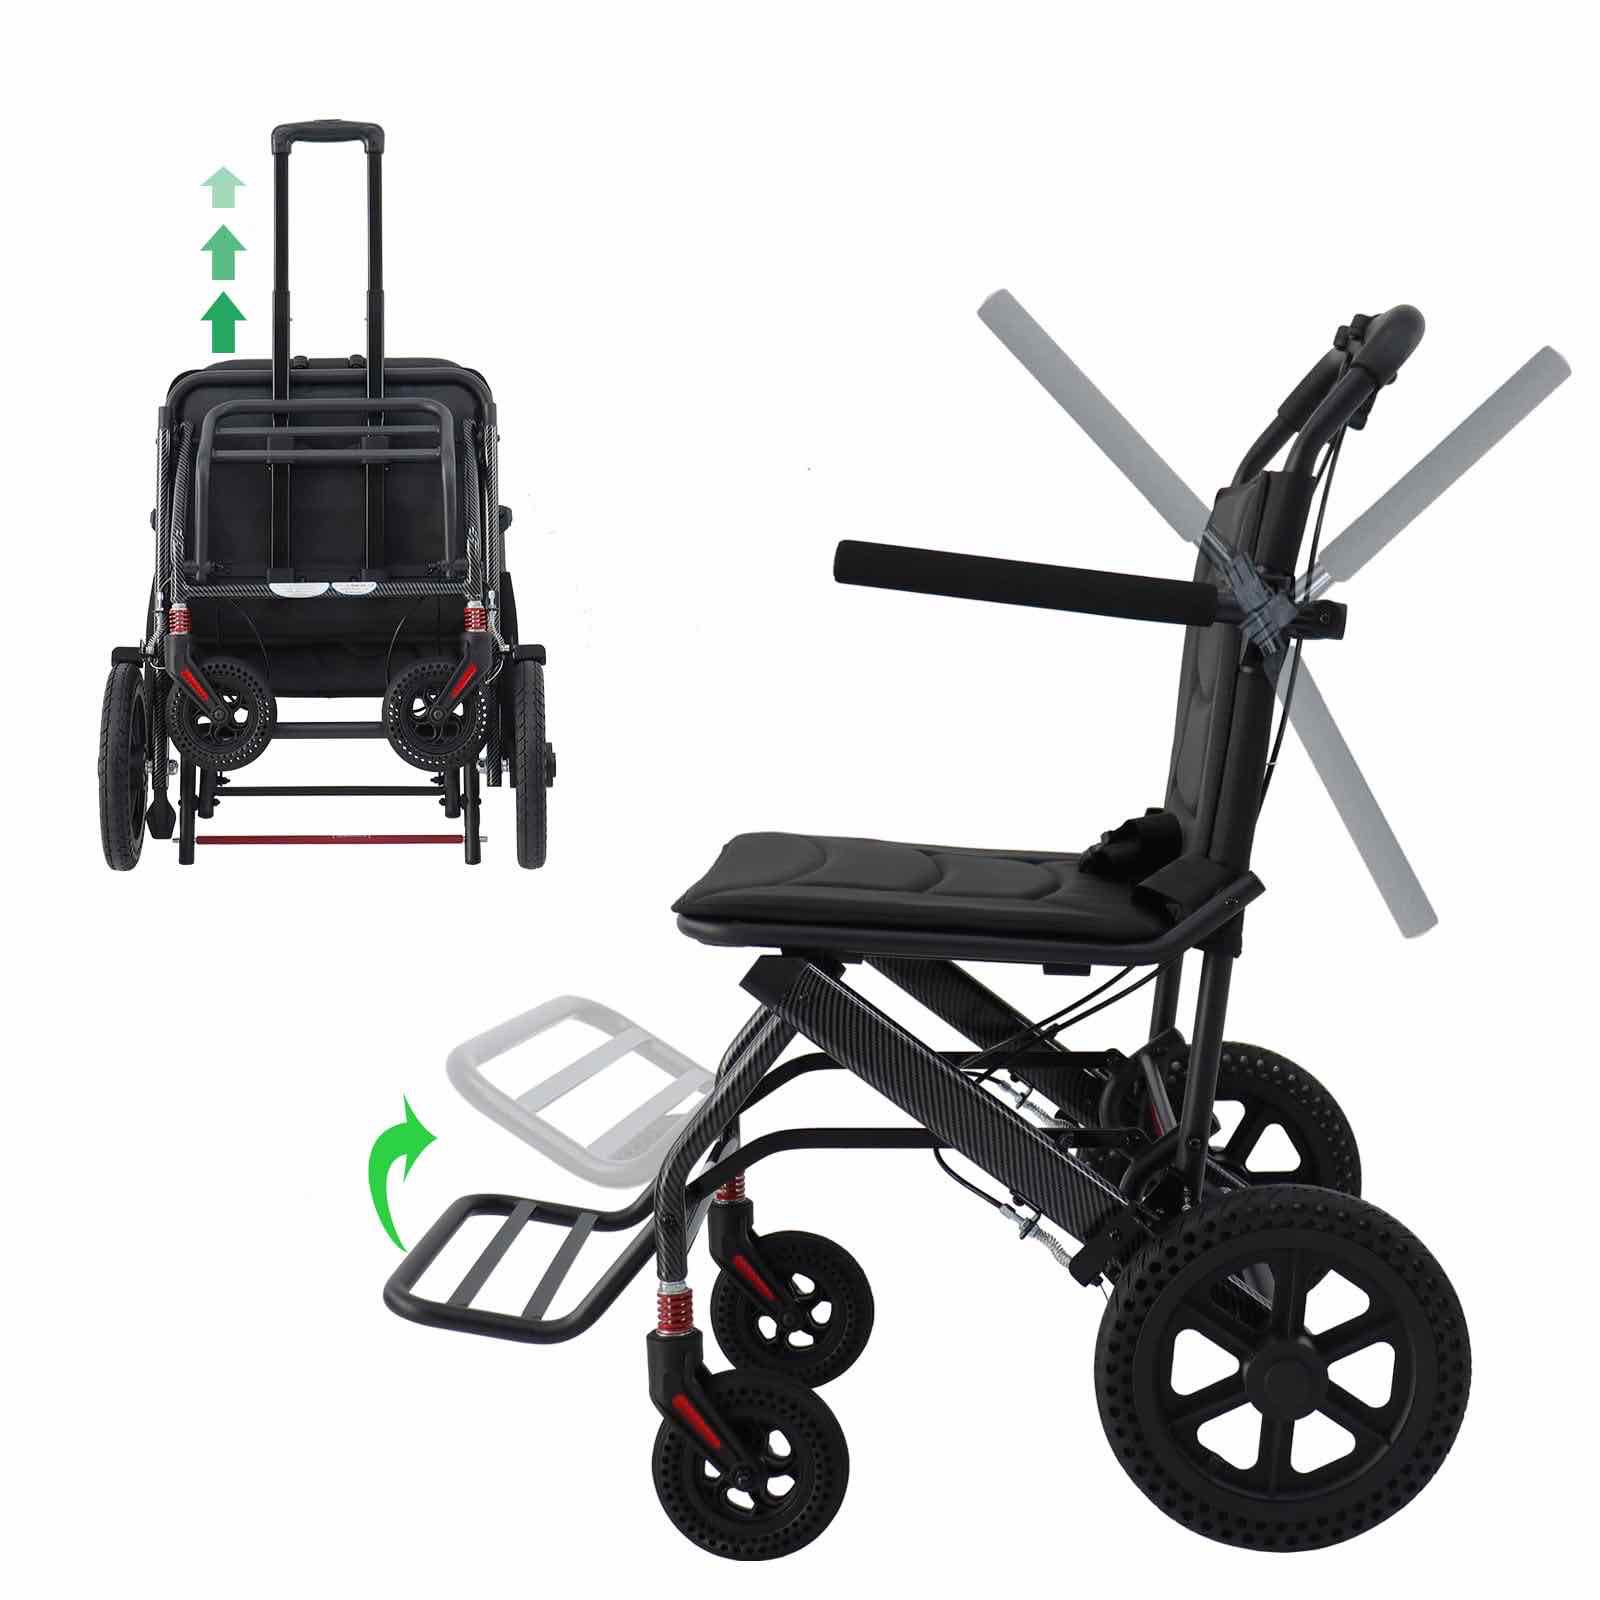 Lightweight Transport Wheelchair with Handbrakes, Folding Transport Chair for Adults has 12 inch Wheels